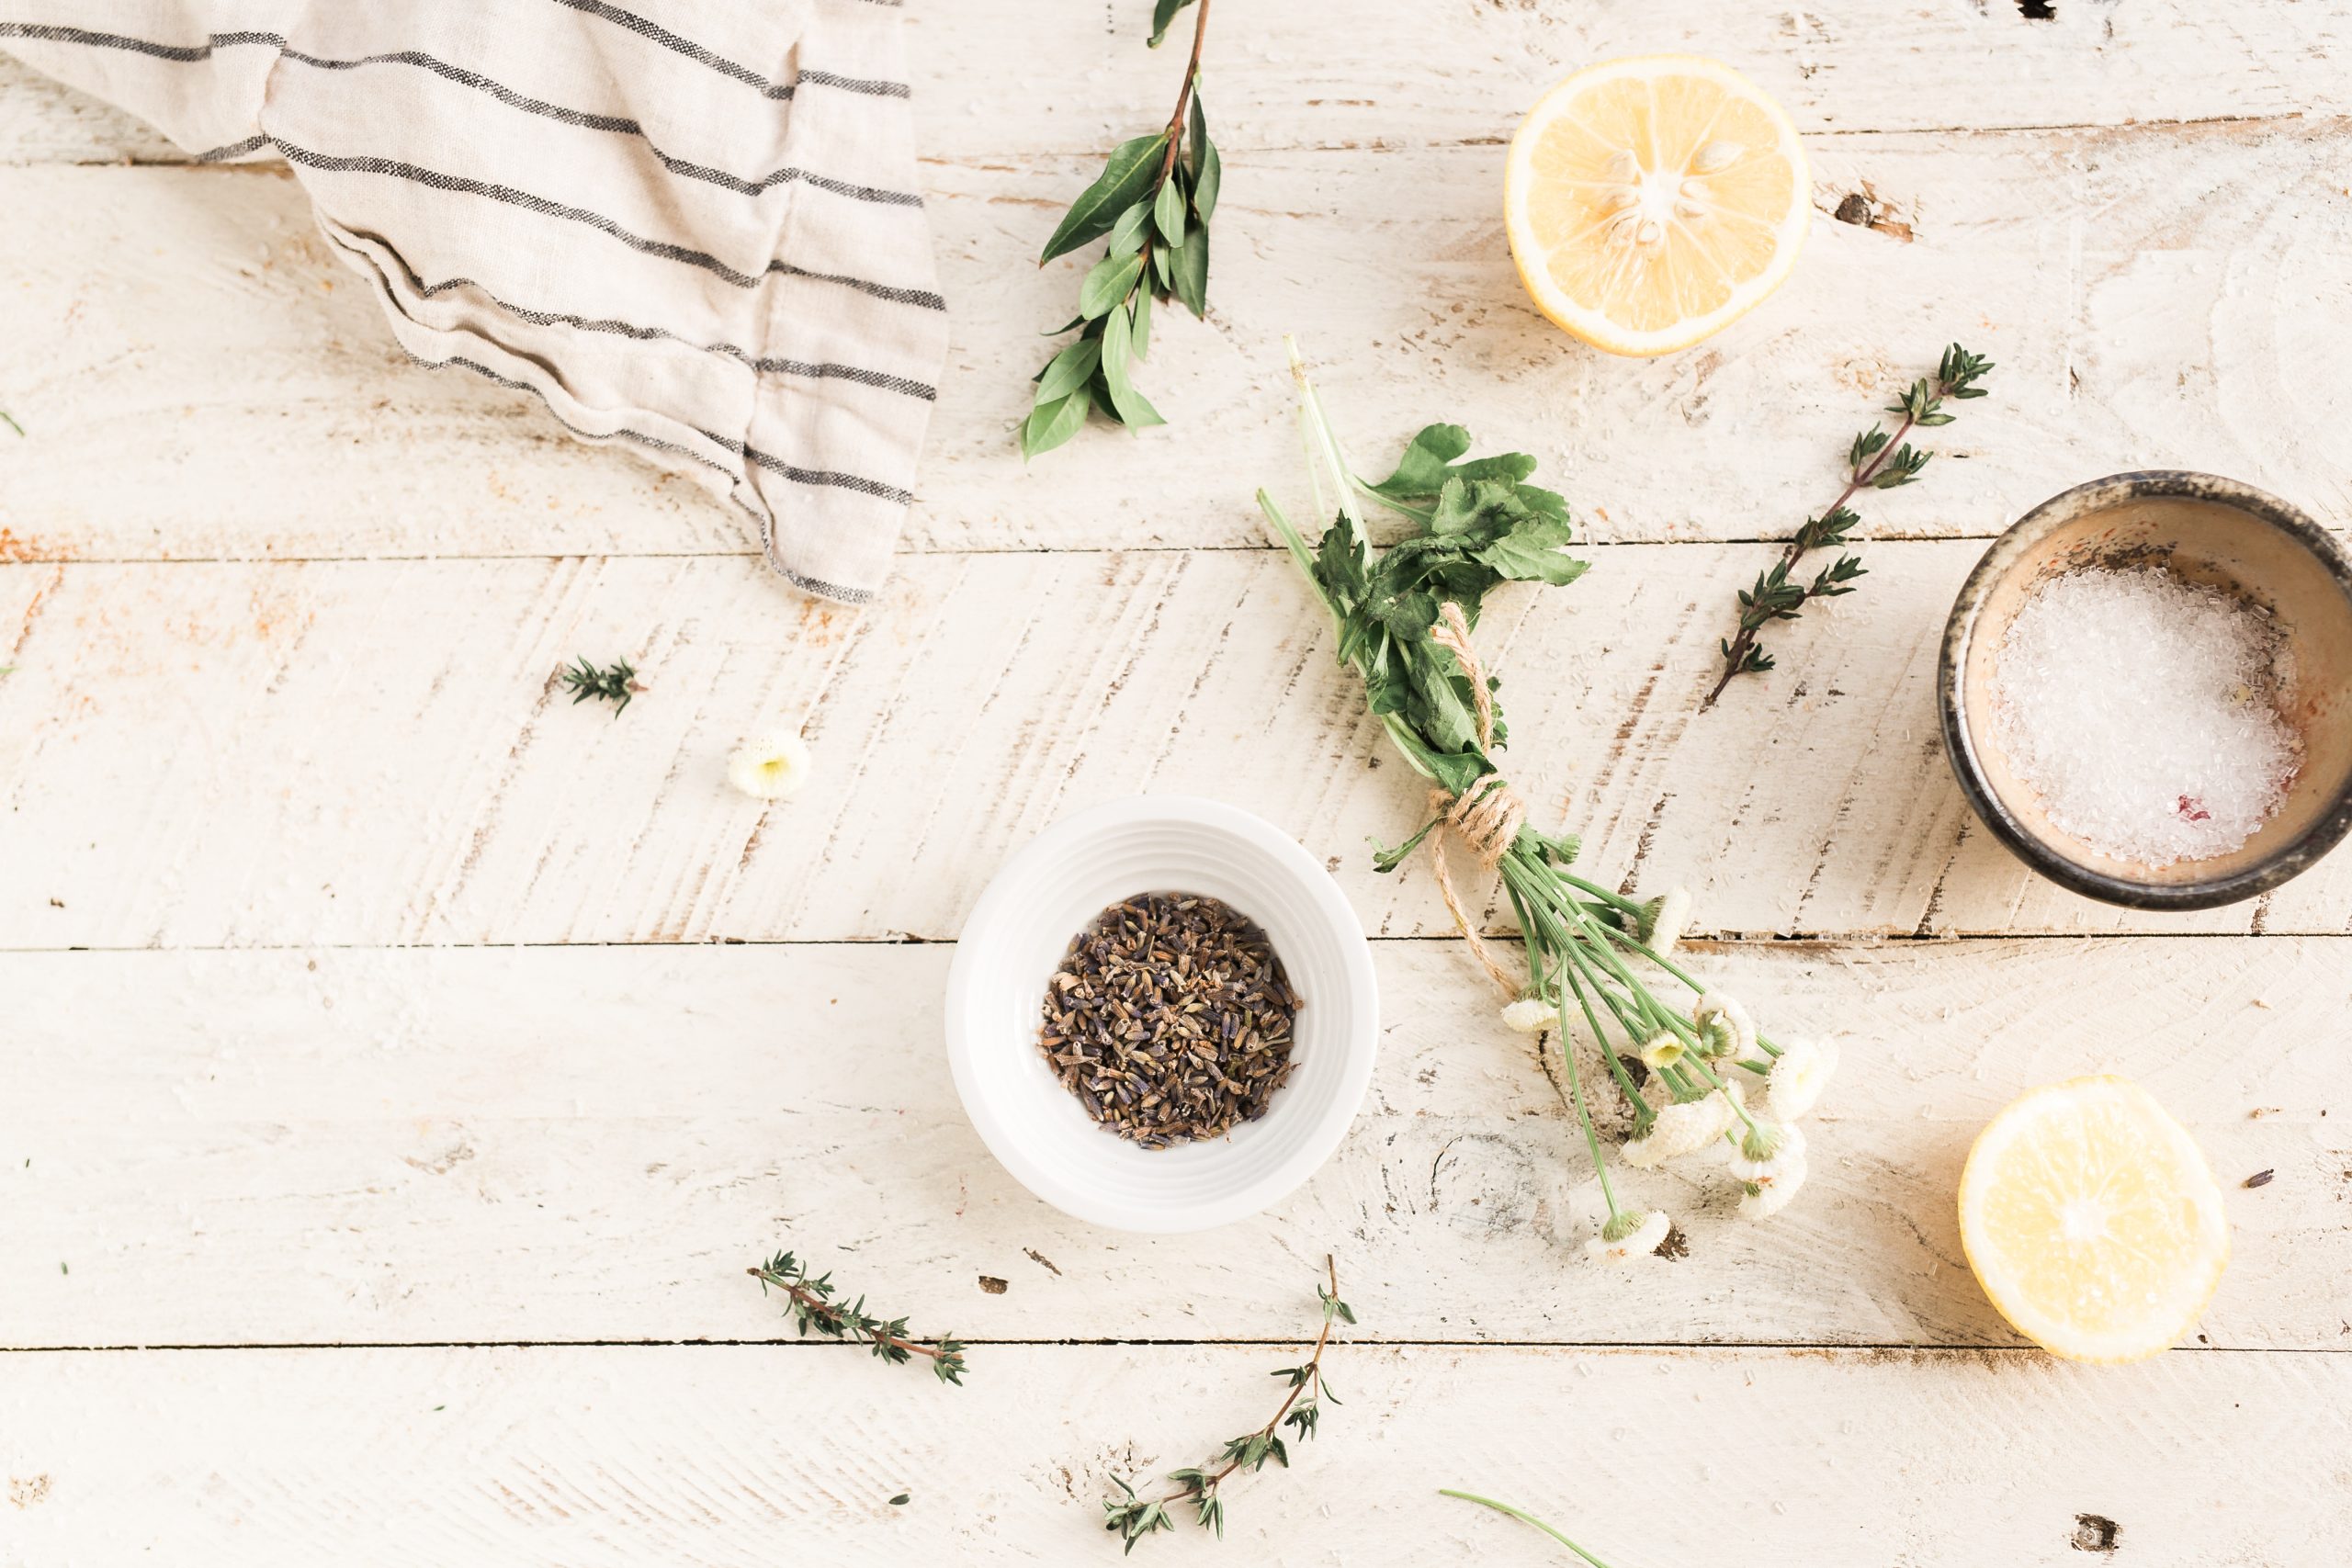 A bowl of herbs and lemons on a wooden table.